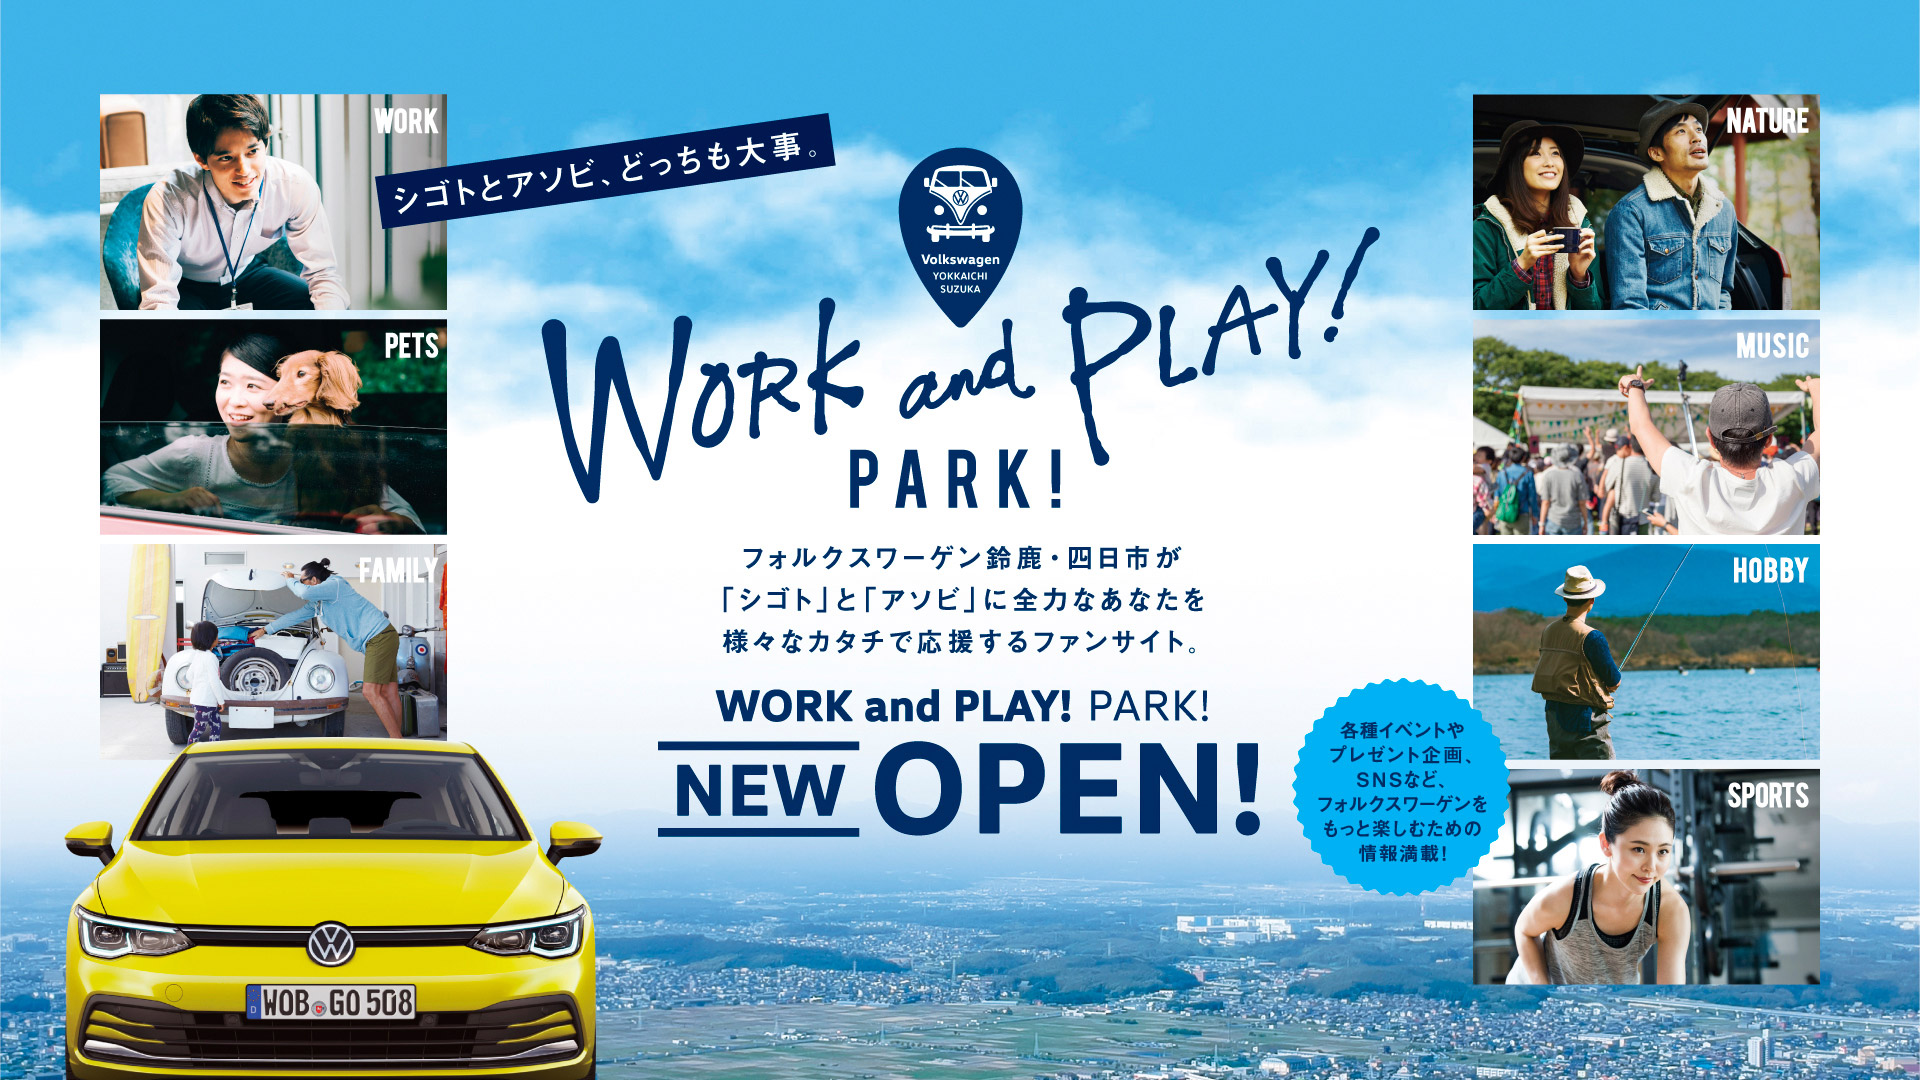 WORK and PLAY! PARK!